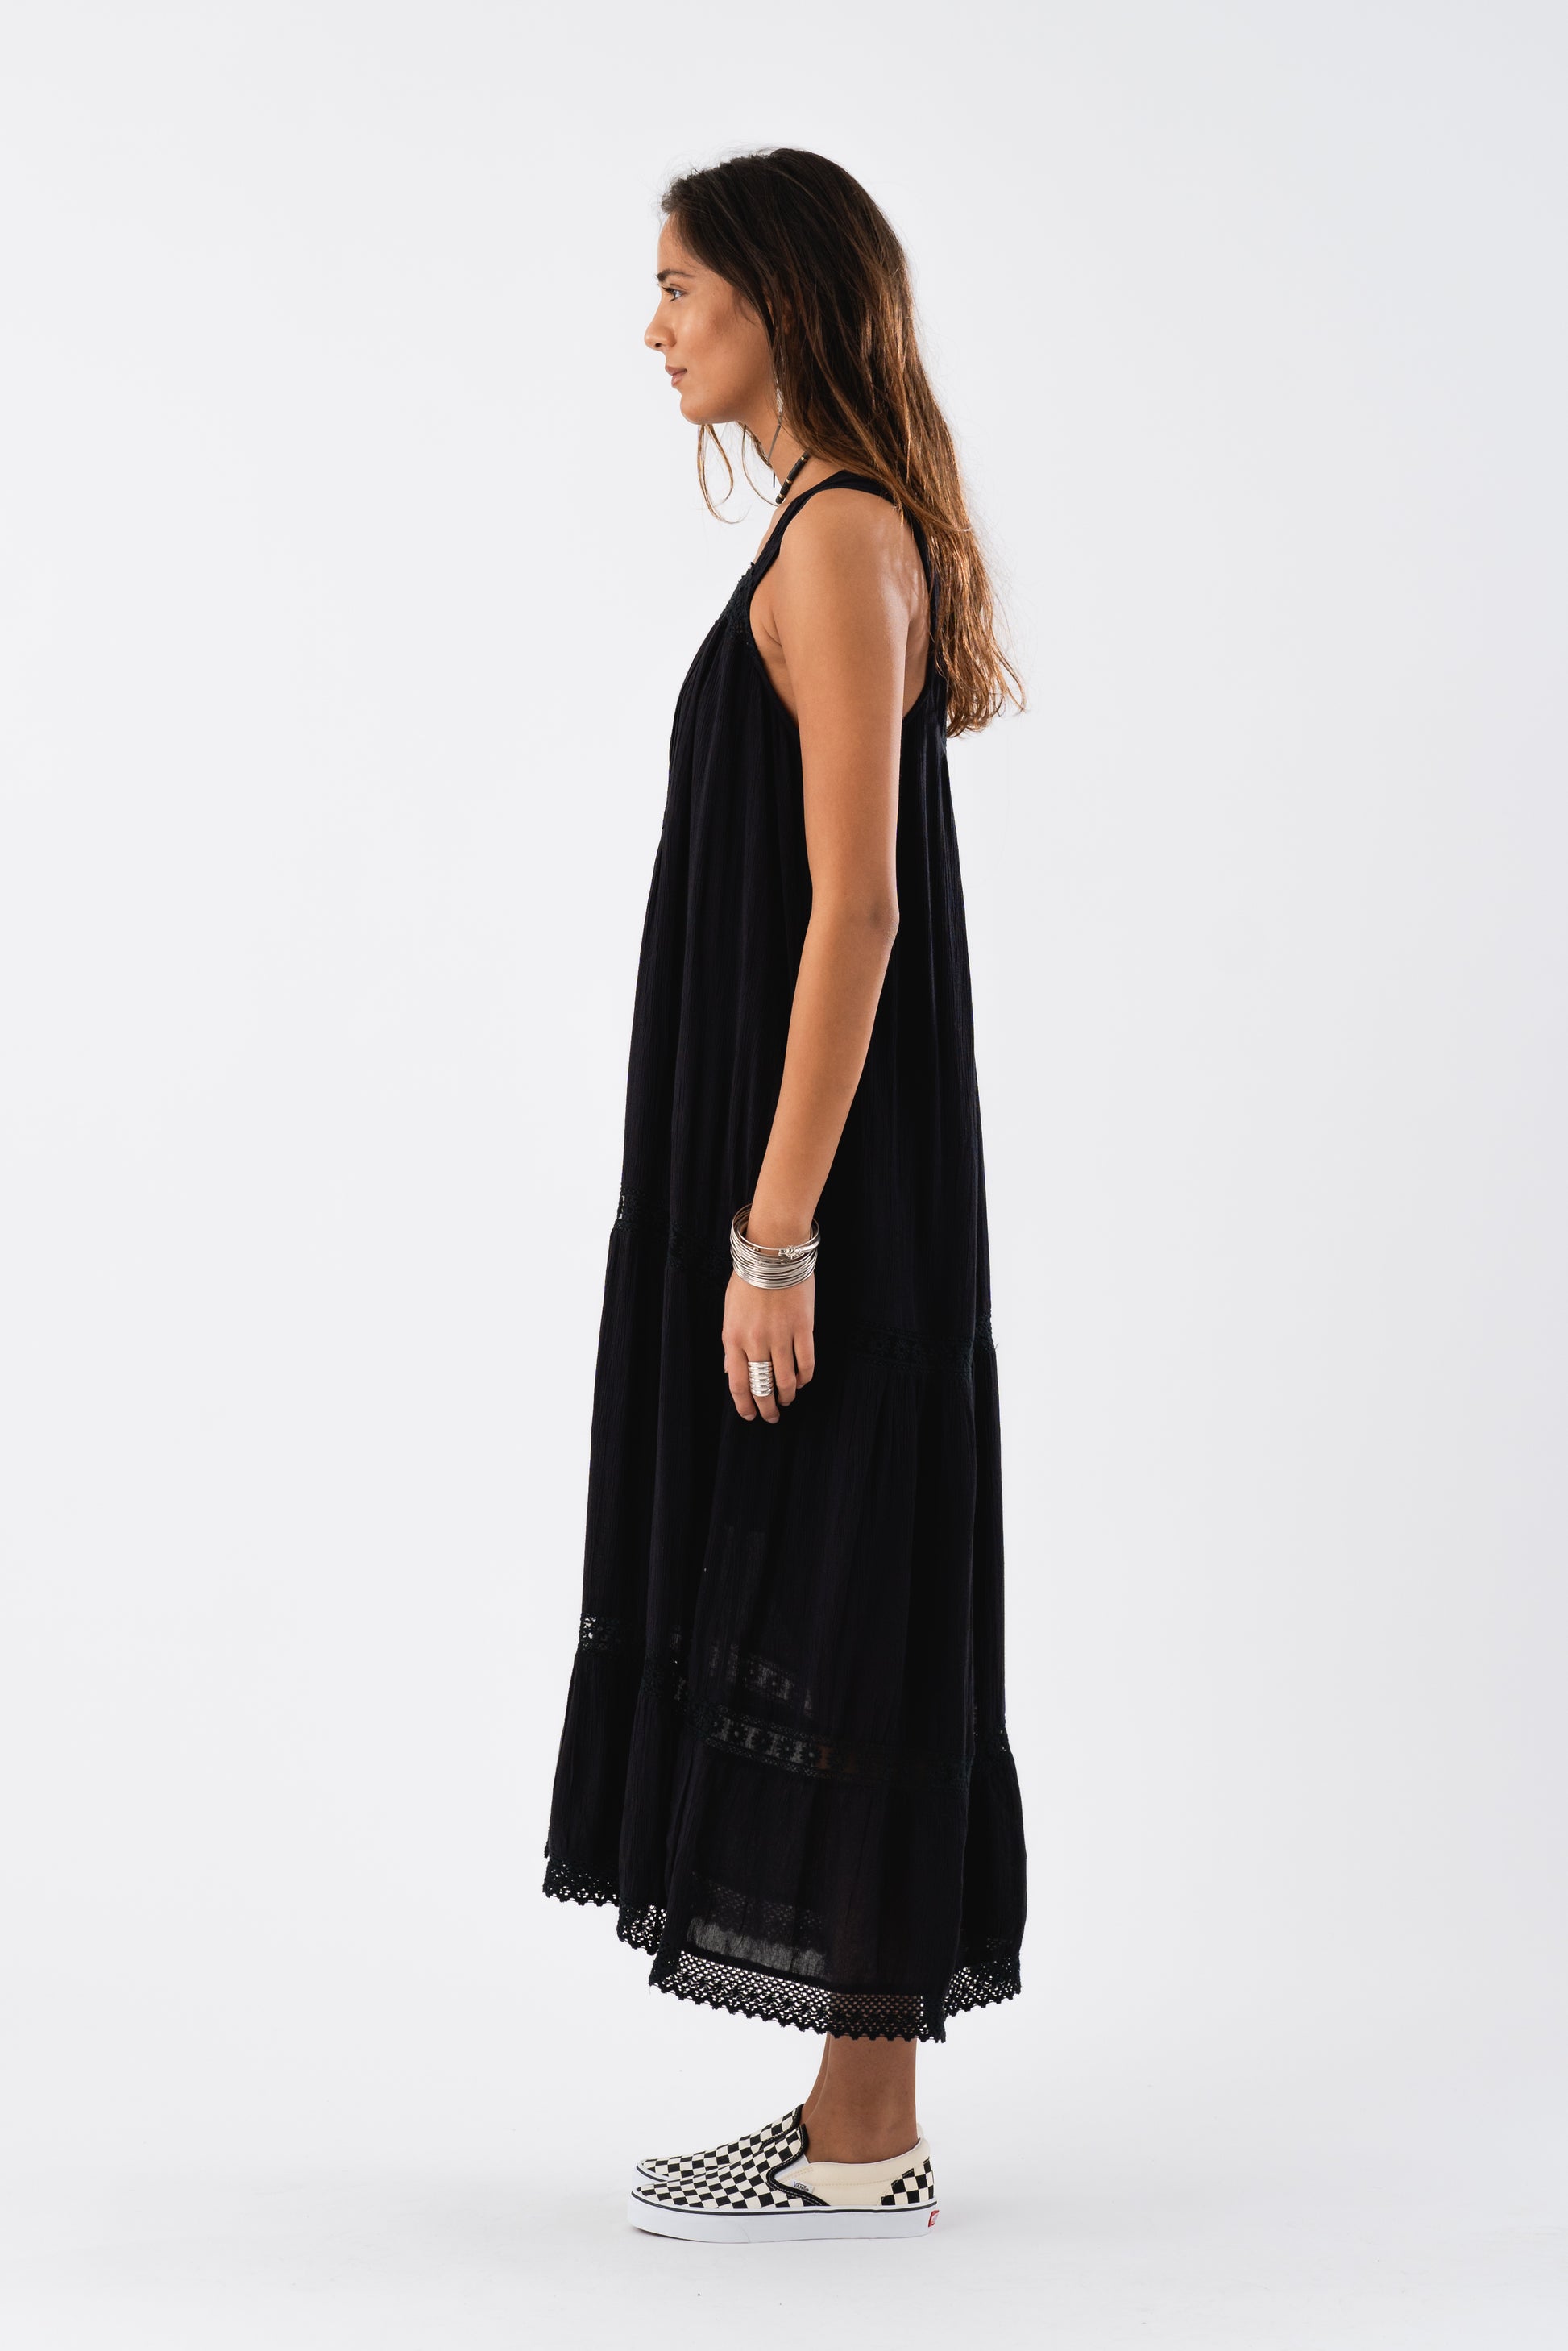 Lollys Laundry QuincyLL Maxi Dress SL Dress 18 Washed Black